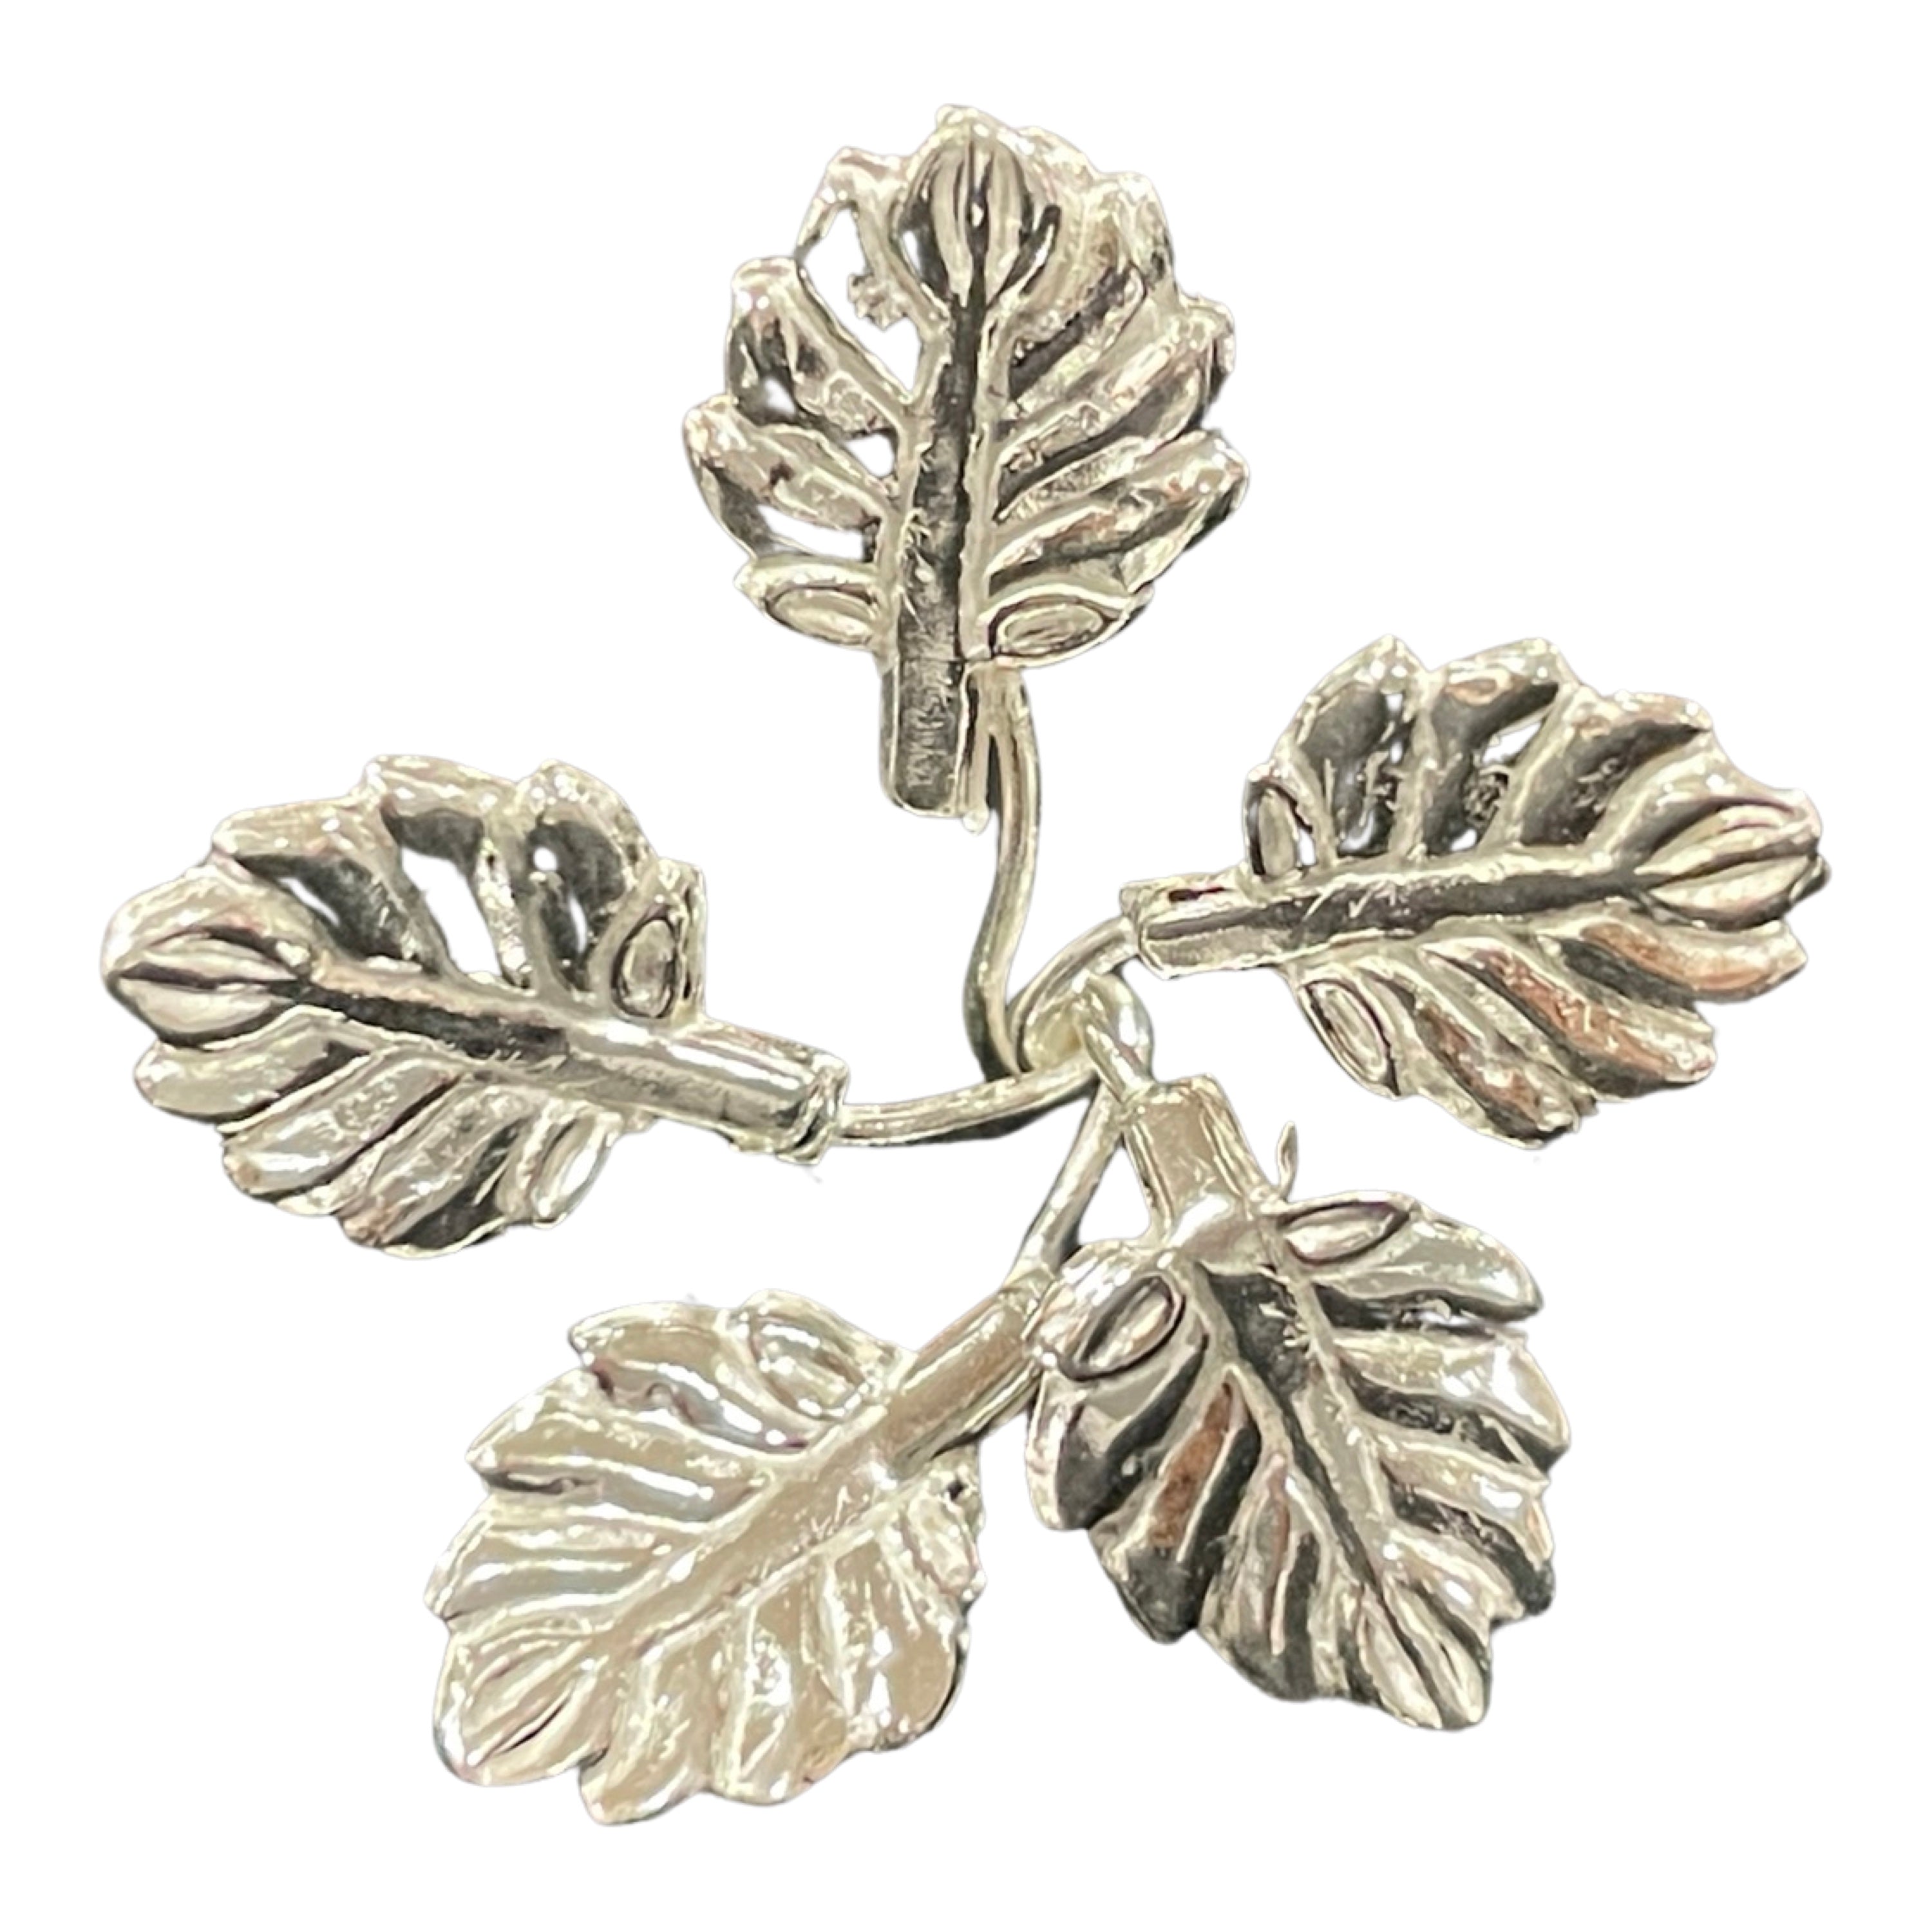 750 Silver Religious Tulsi / Basil Leaves (Set of 10 branches) Set - Style#03